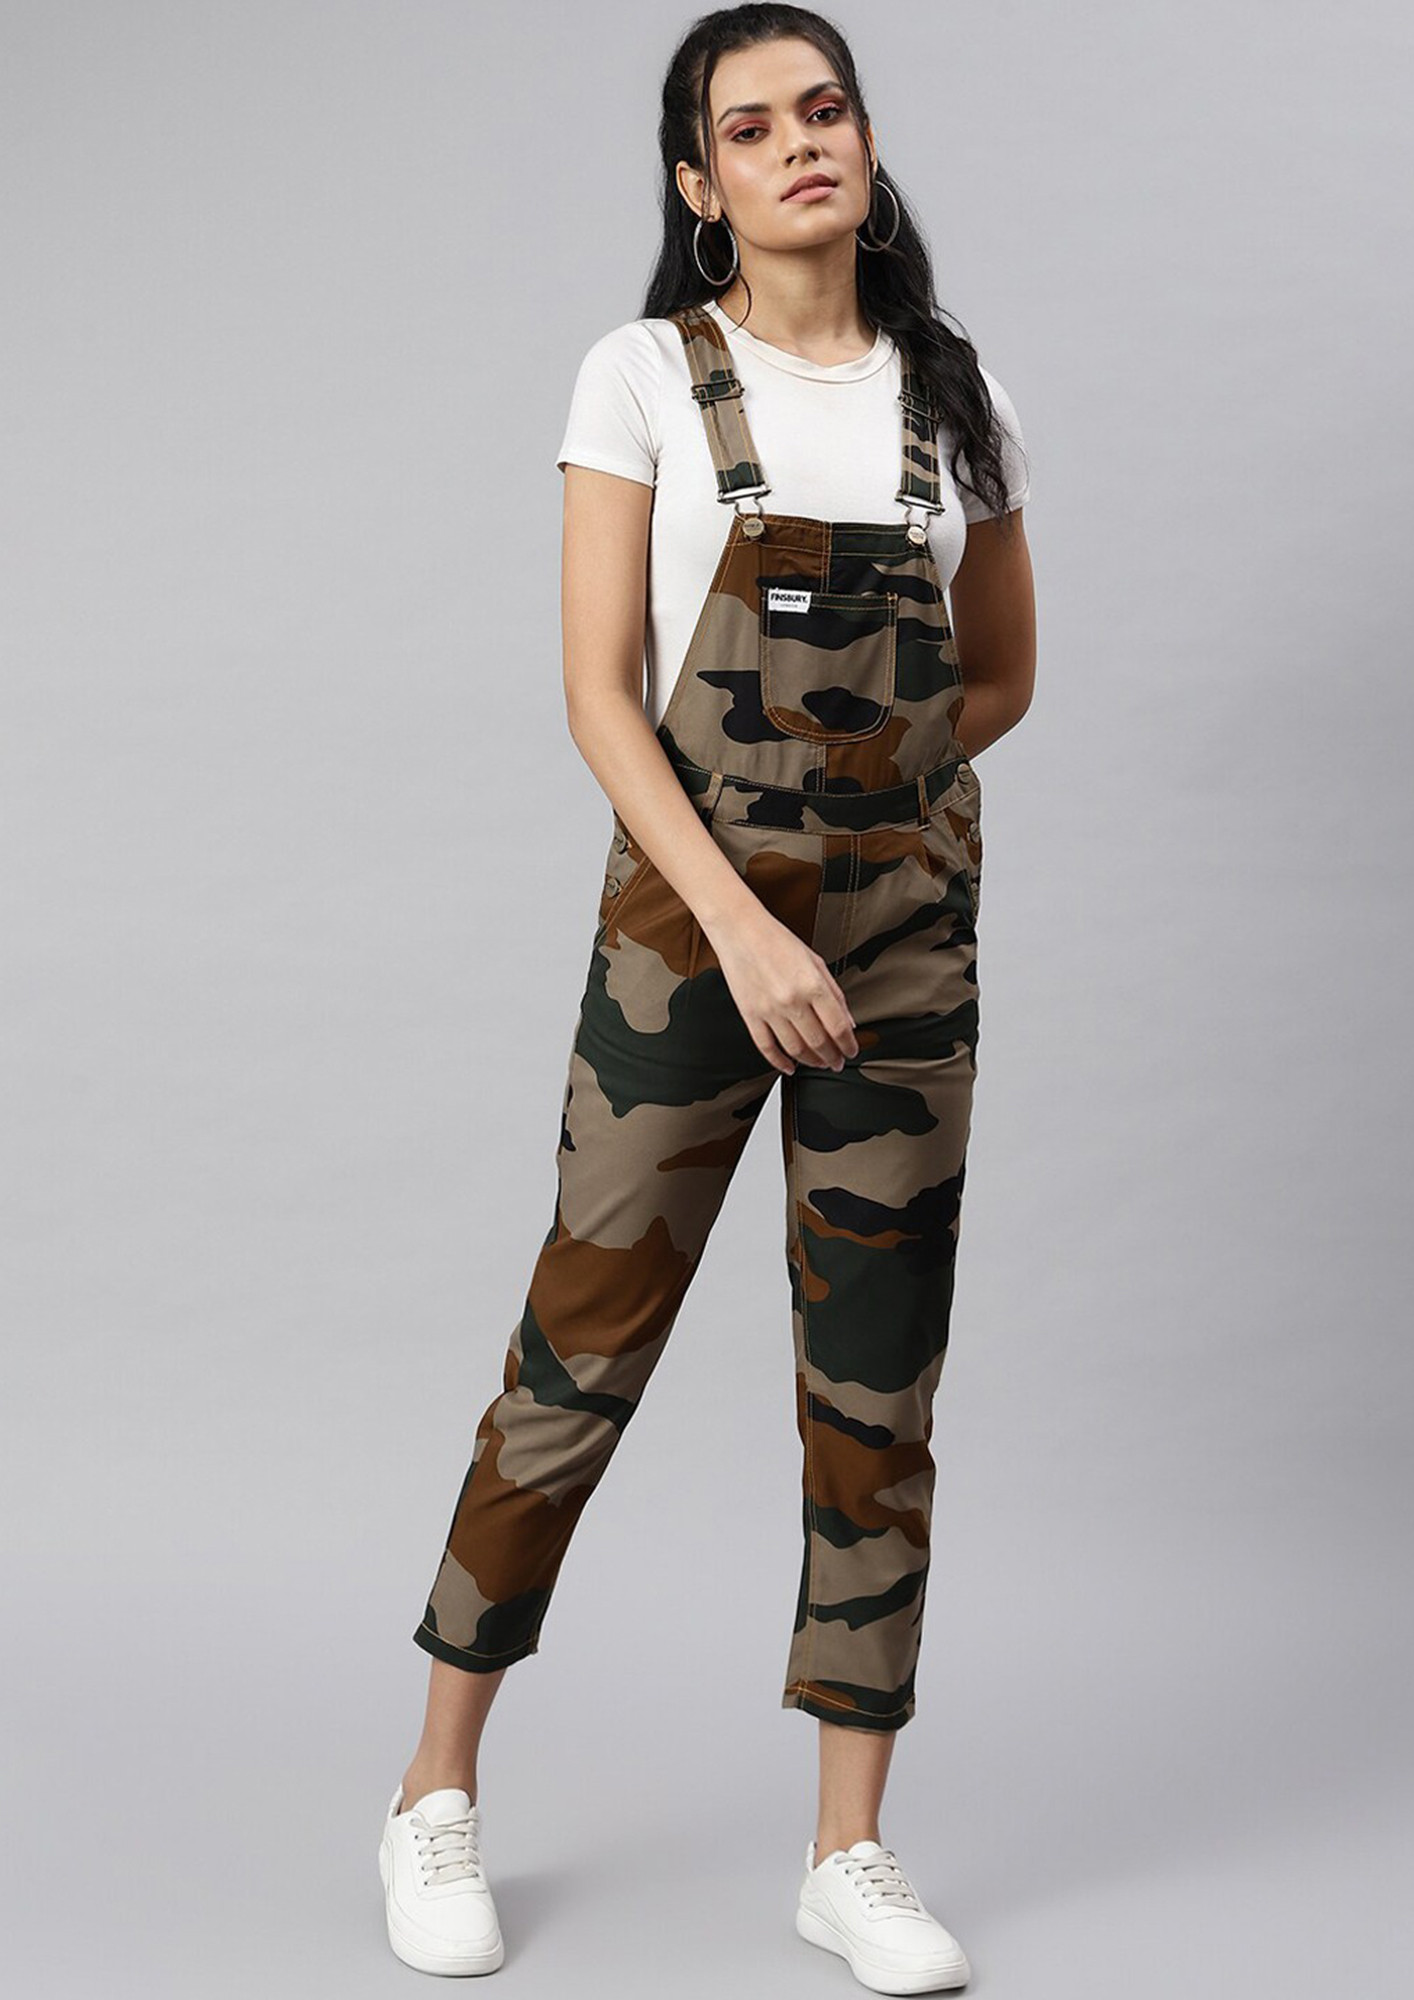 Finsbury Camouflage Army Print Women Dungaree